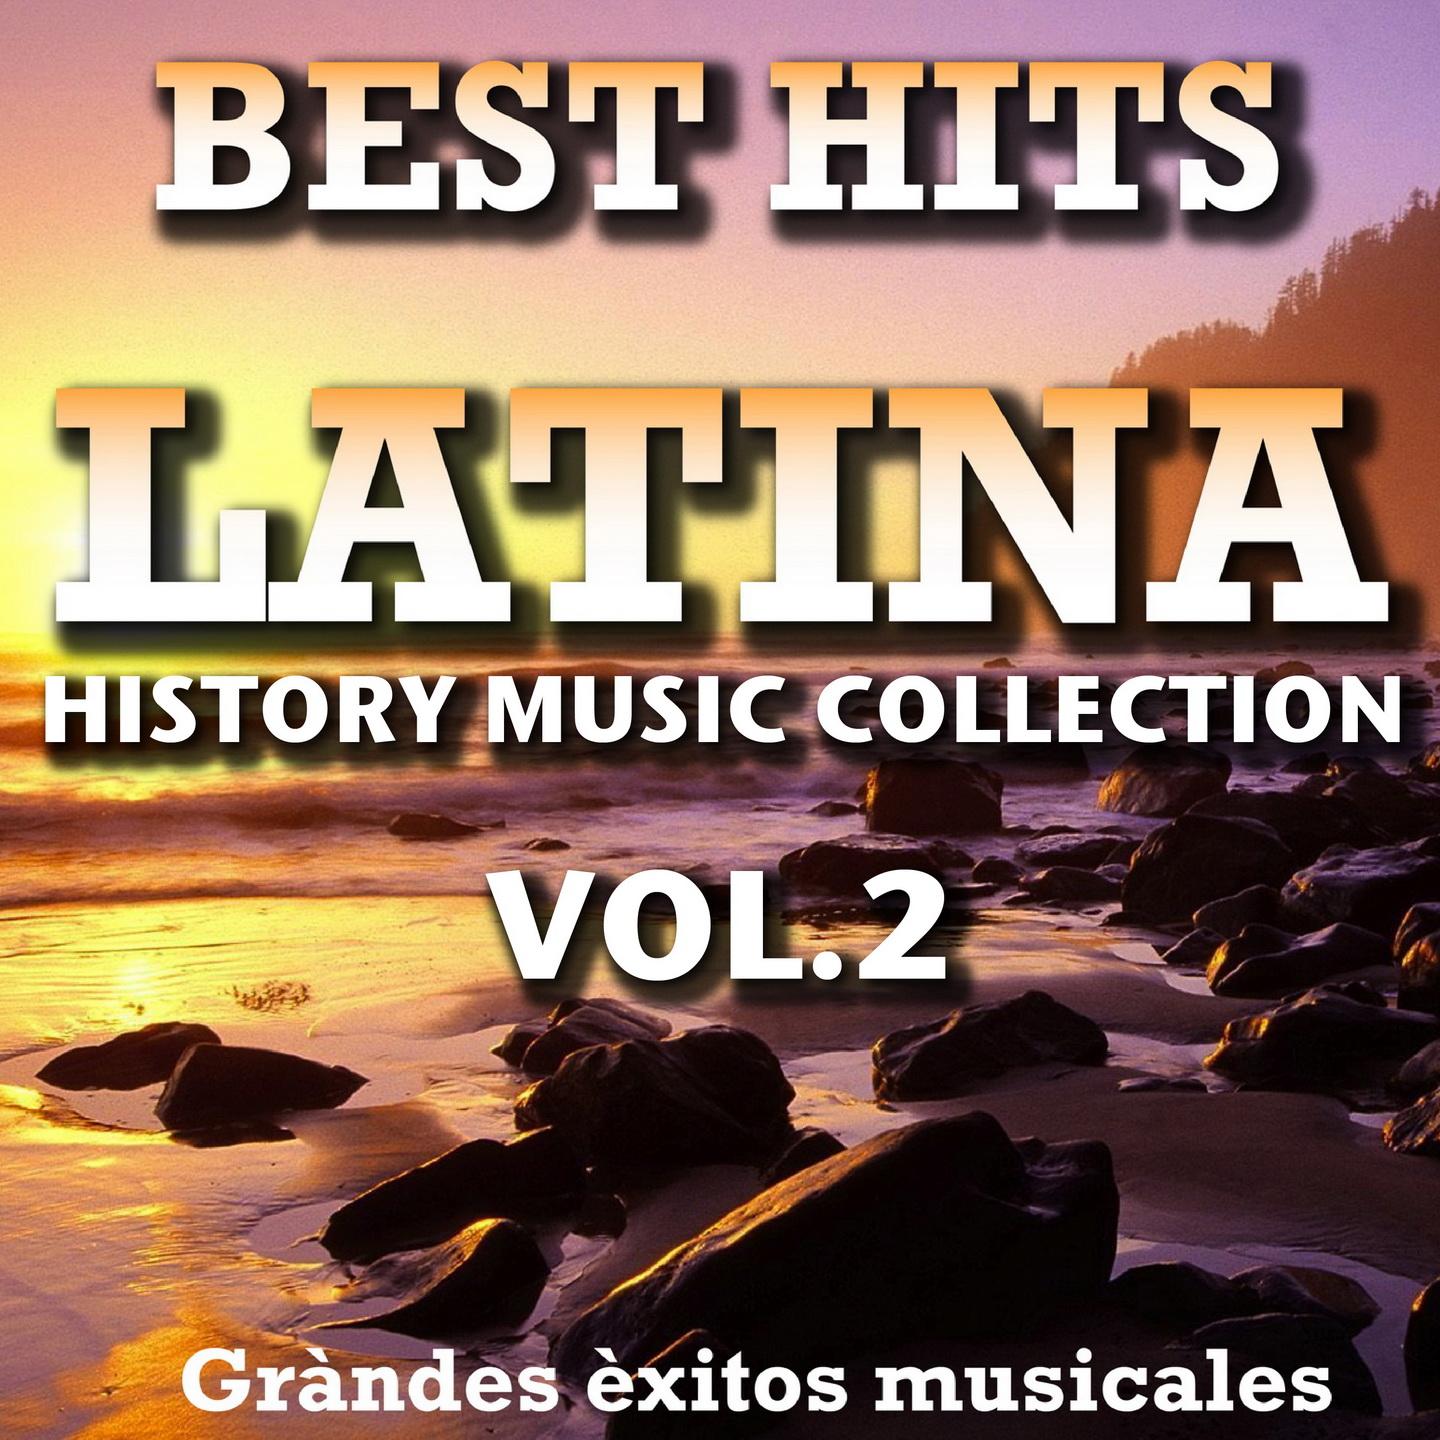 Best Hits Latina History Music Collection, Vol. 2